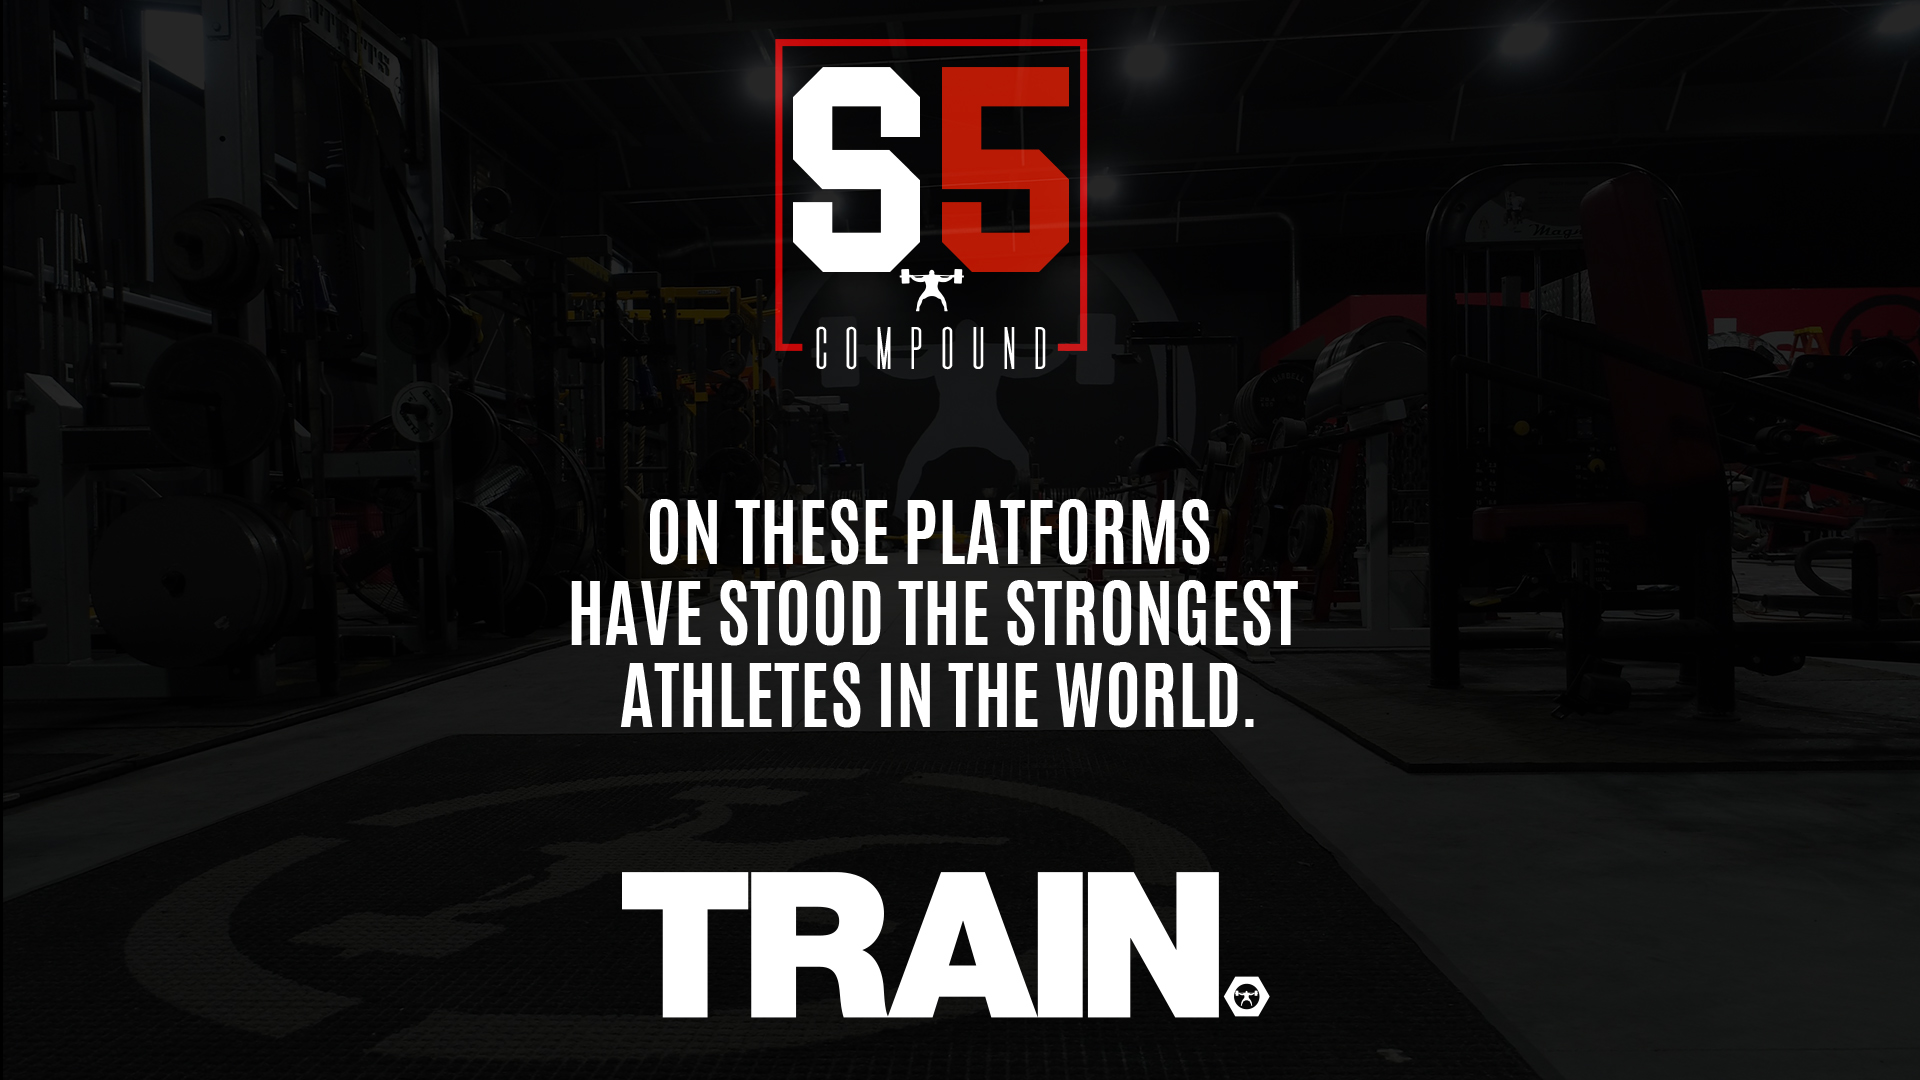 Squat Training at the EliteFTS S5 Compound w/ Video